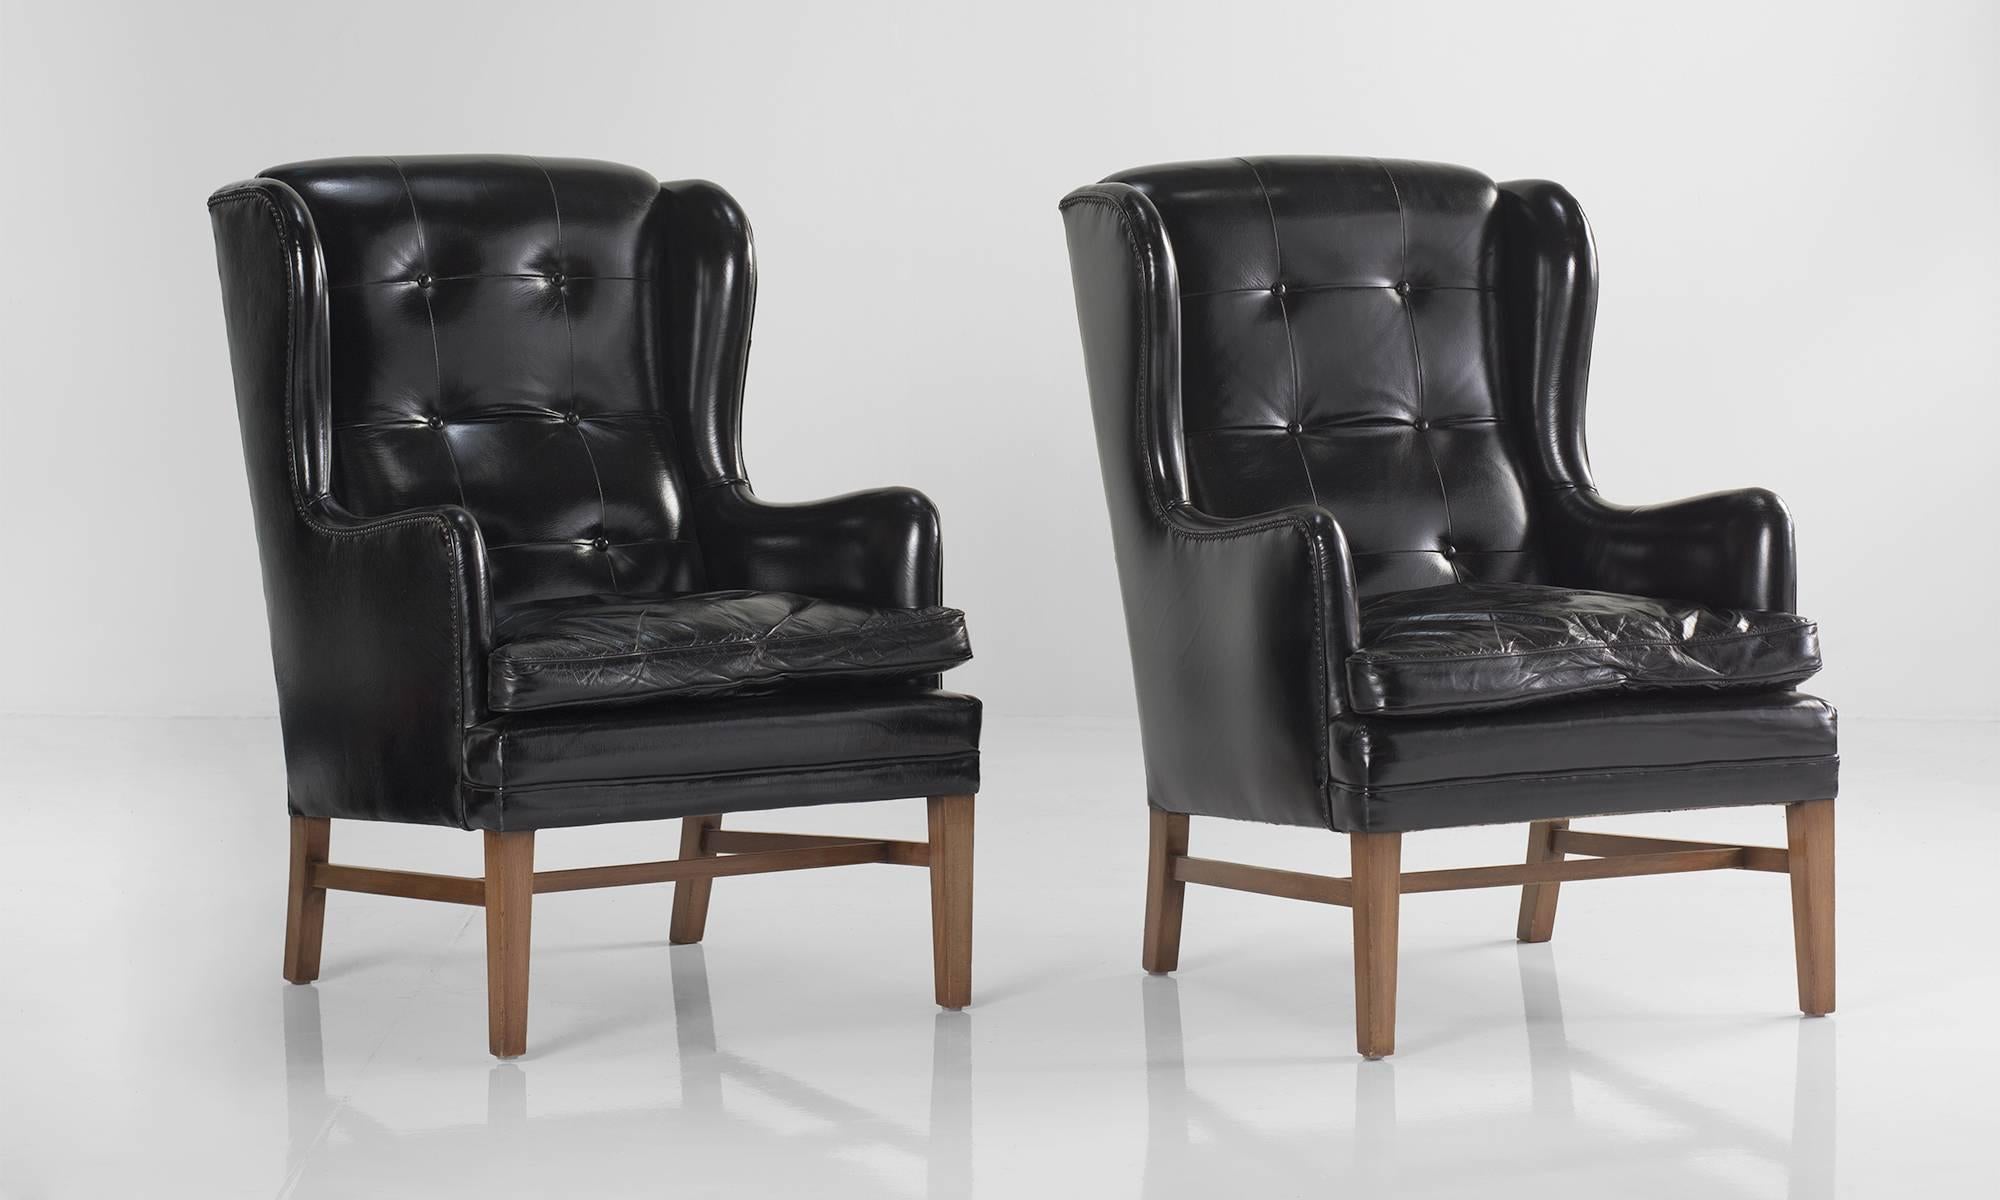 Black leather wing armchairs, Sweden, circa 1950.

Original leather, button back upholstery on walnut color birch frame.